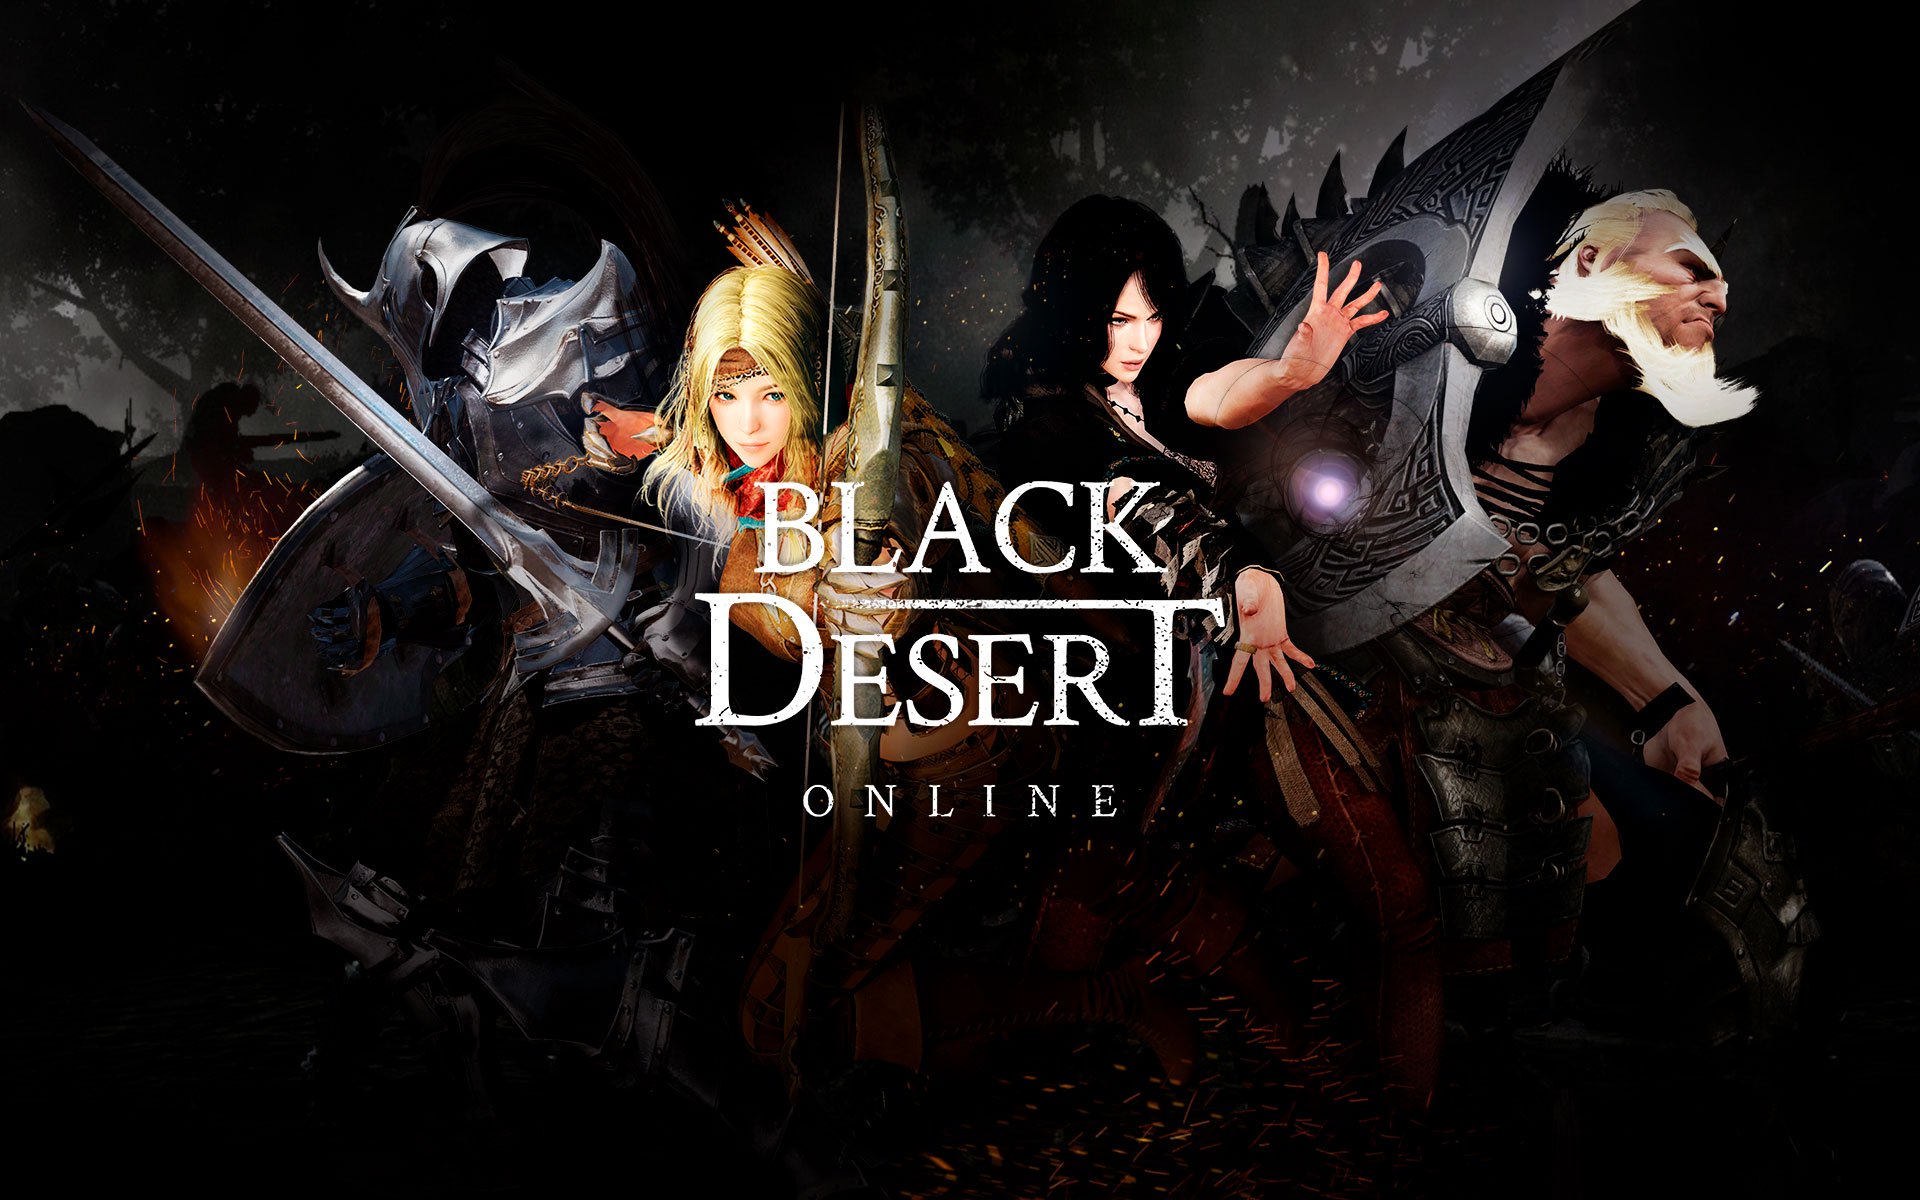 0ba85499-0b28-48b3-bfa1-c6304929e346c04d190d-7419-46aa-b9f5-d30004d1dc15BlackDesertOnline-cover